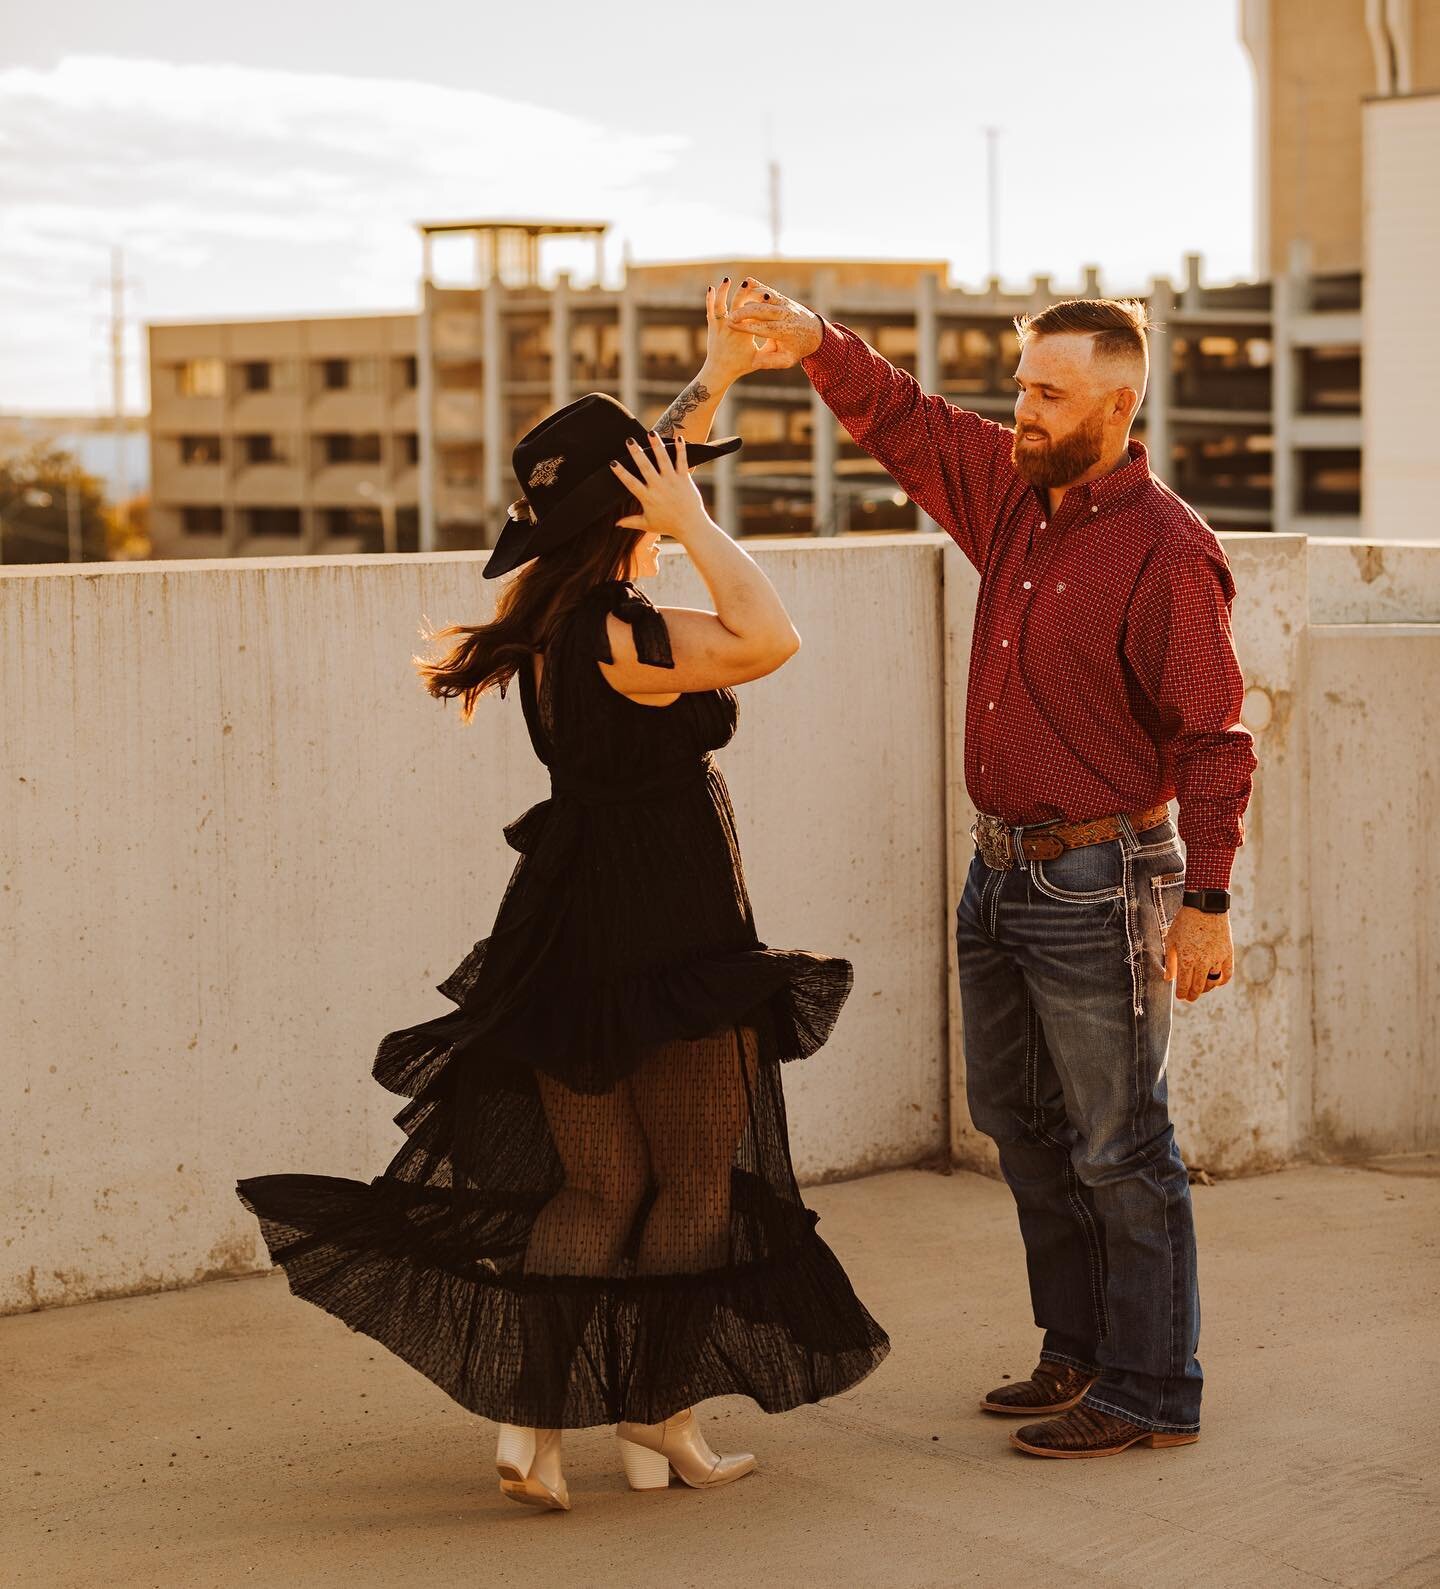 These two brought this parking garage vision to life in Midland on Wednesday! ⭐️🖤 Who is next?! 
.
.
.
#kristafrancisphotos #midlandtxcouplesphotographer #midlandtx #couplesphotographer #texascouples #texascouplesphotographer #lubbocktexas #amarillo